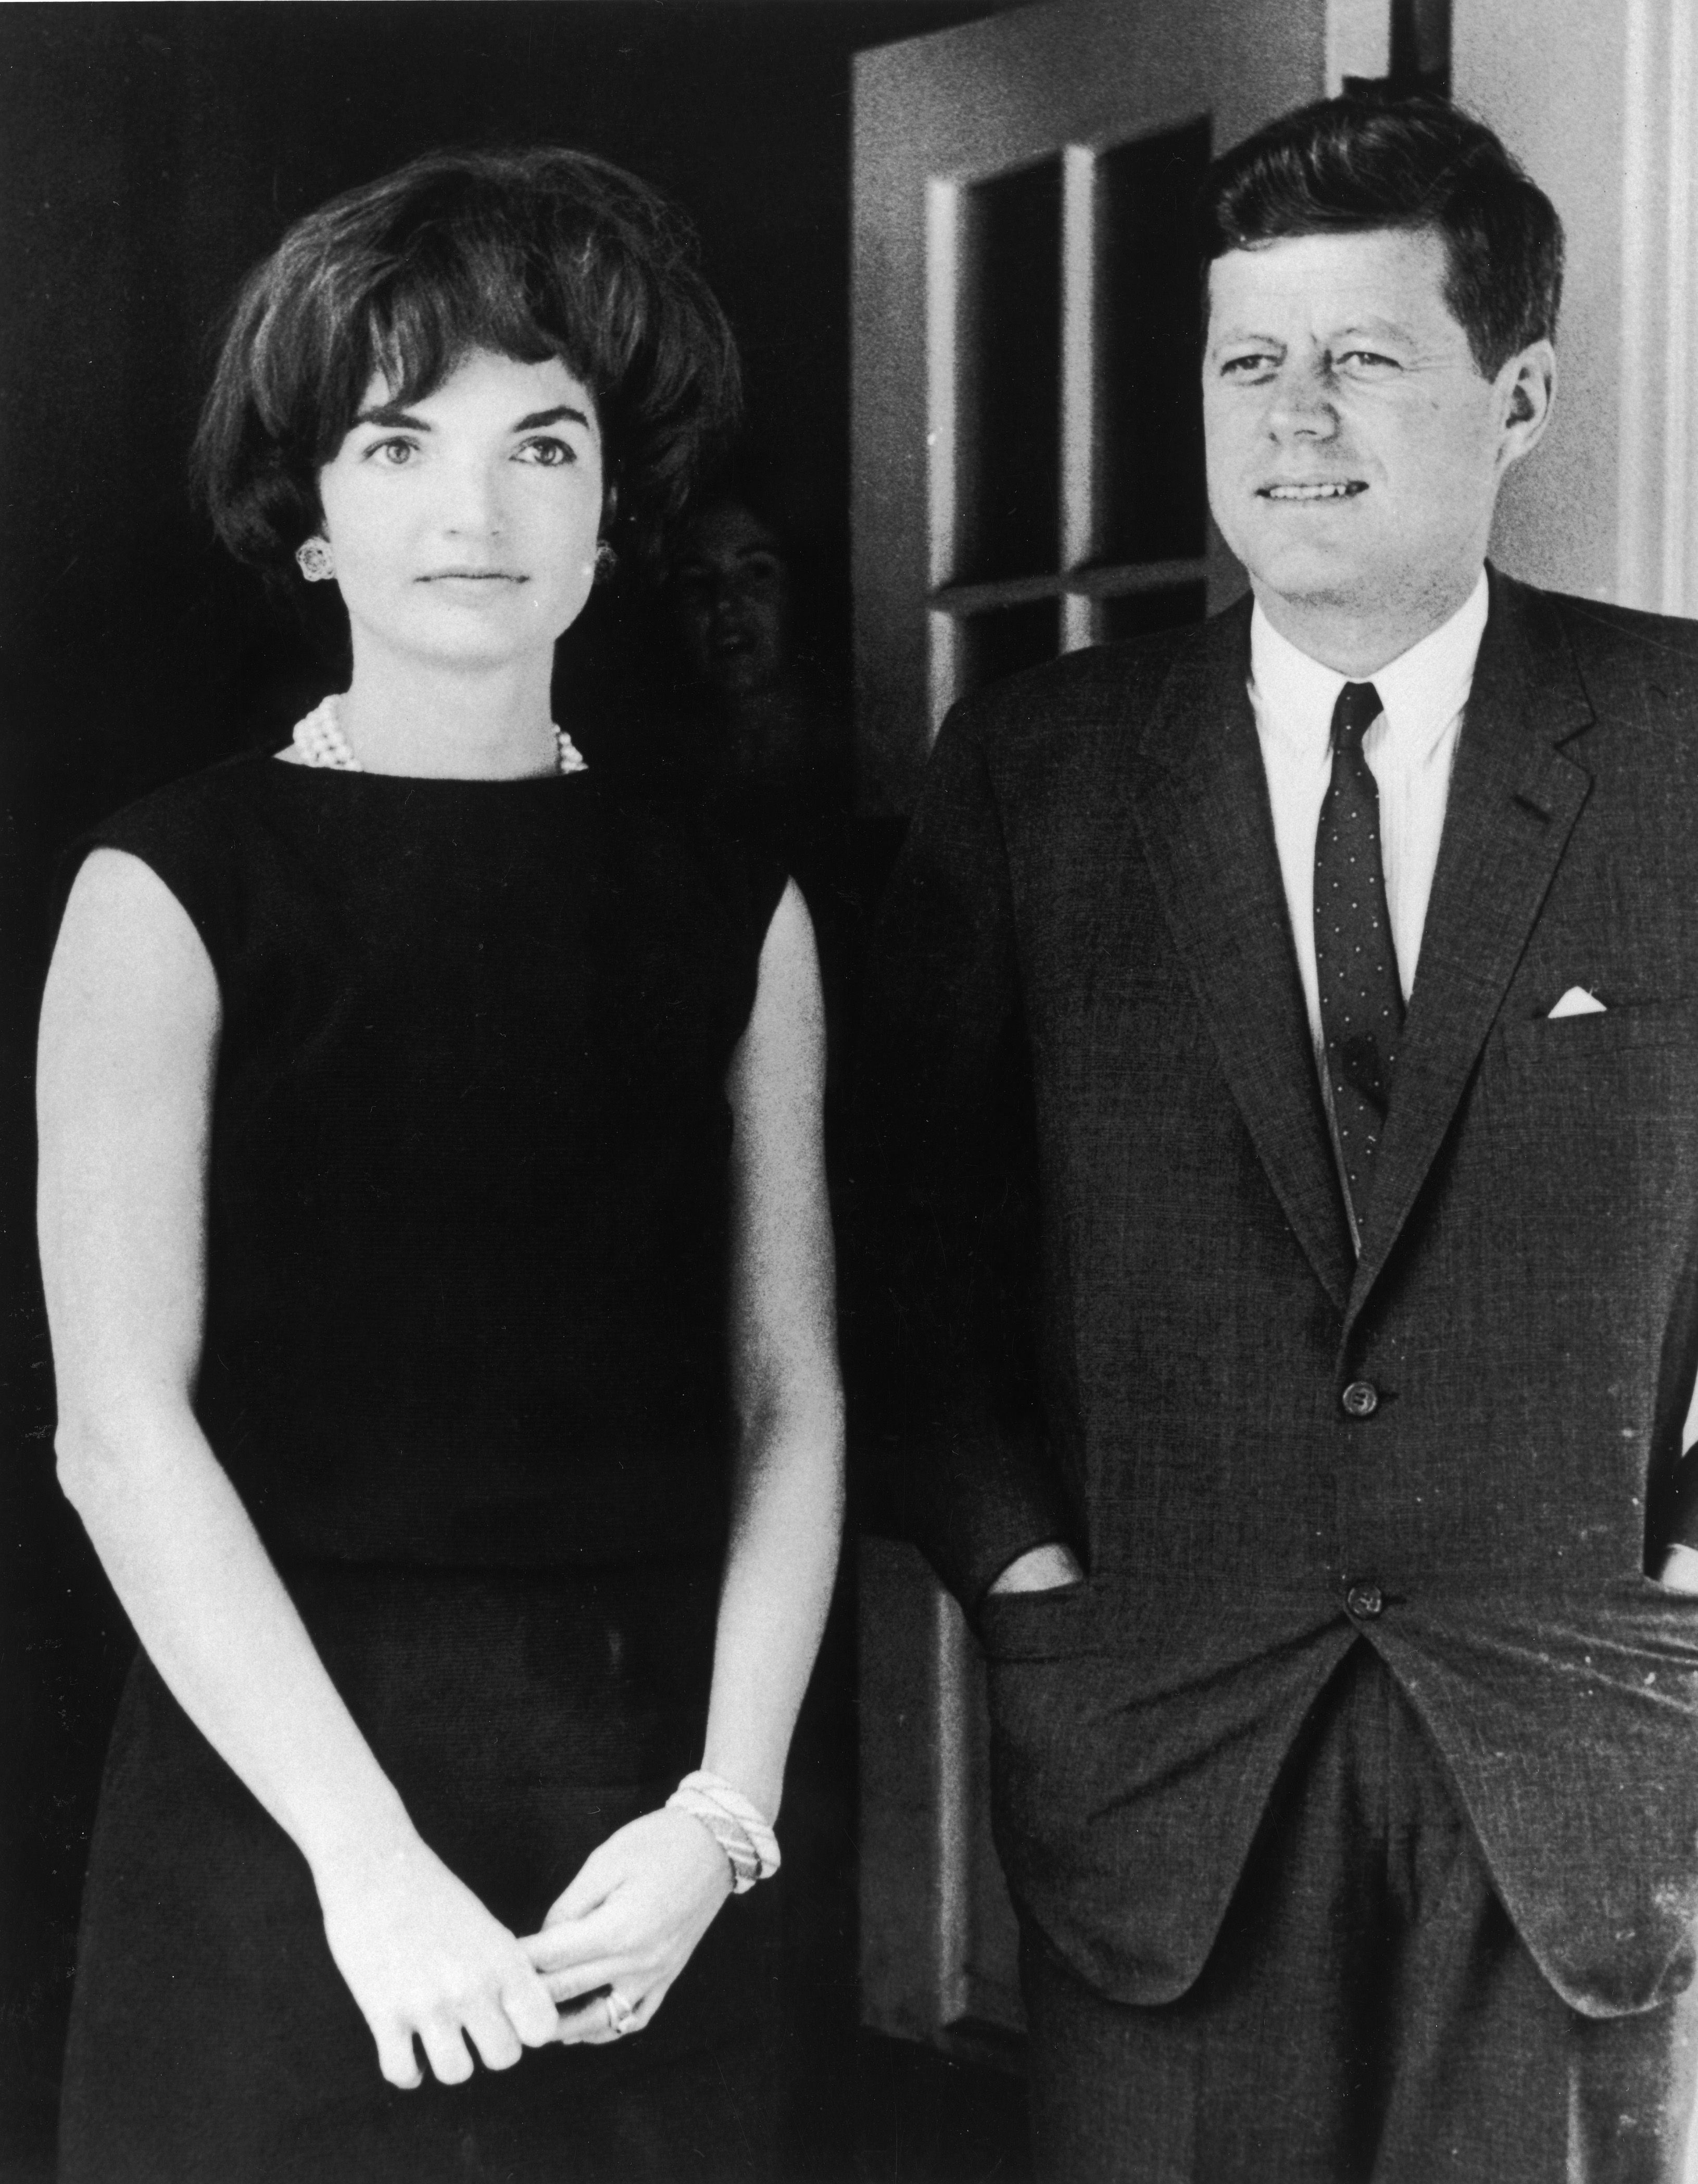 US First Lady Jacqueline Kennedy with her husband, President John F. Kennedy at the White House in Washington, D.C., circa 1961. | Source: Hulton Archive/Getty Images